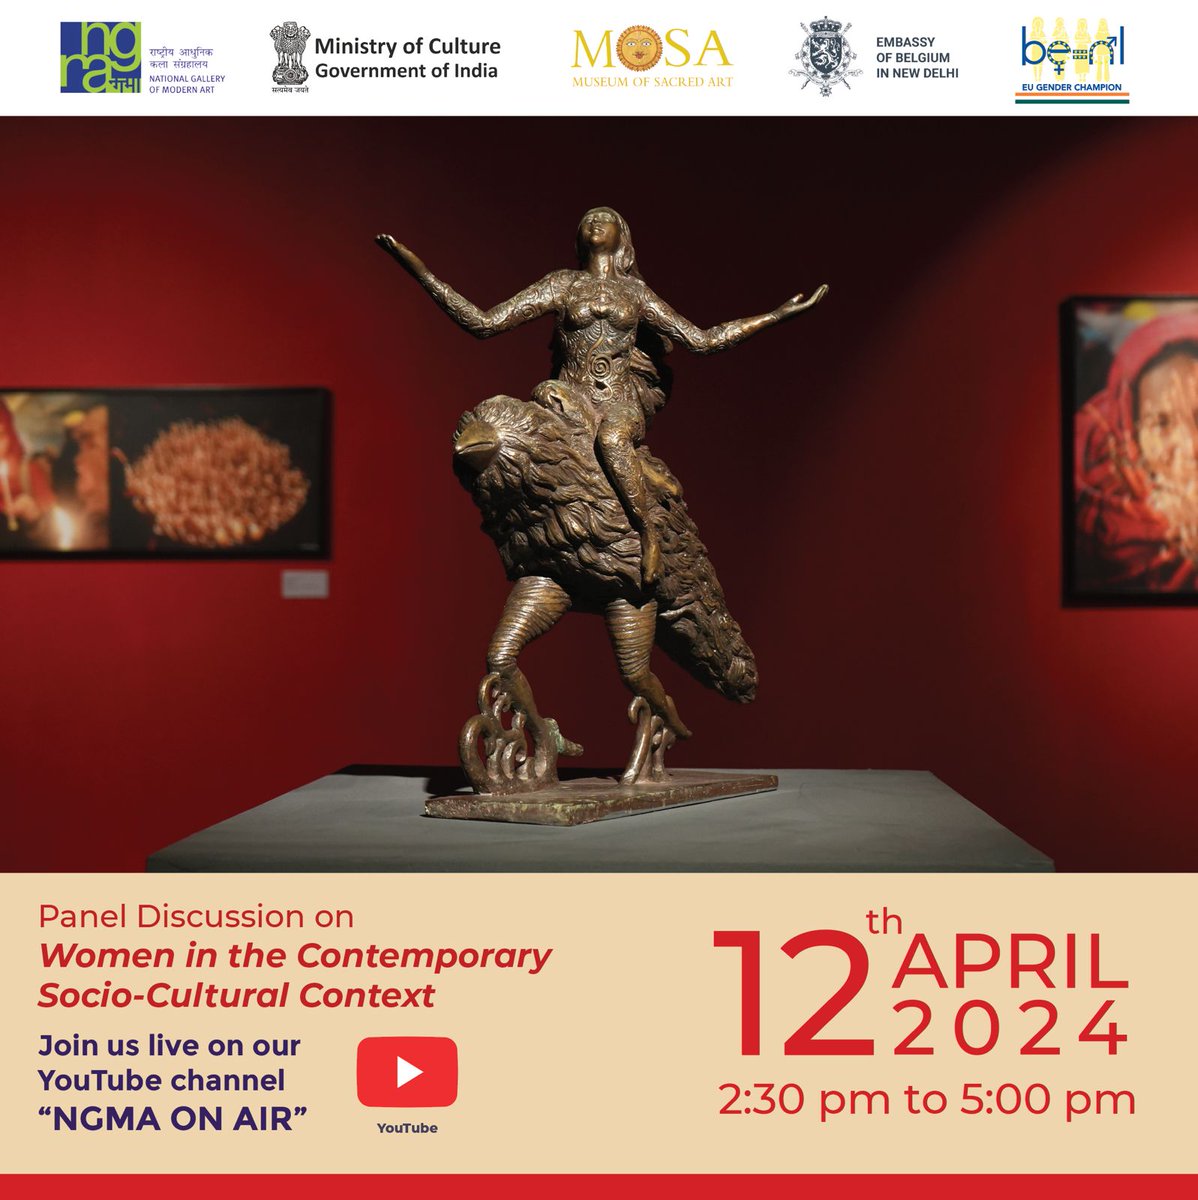 Empowerment, Equality, and Evolution: Tune in to our live panel discussion on 'Women in the Contemporary Socio-Cultural Context' on April 12, 2024, from 2:30 pm to 5:00 pm, exclusively on our YouTube channel 'NGMA ON AIR'. Don't miss this insightful conversation!